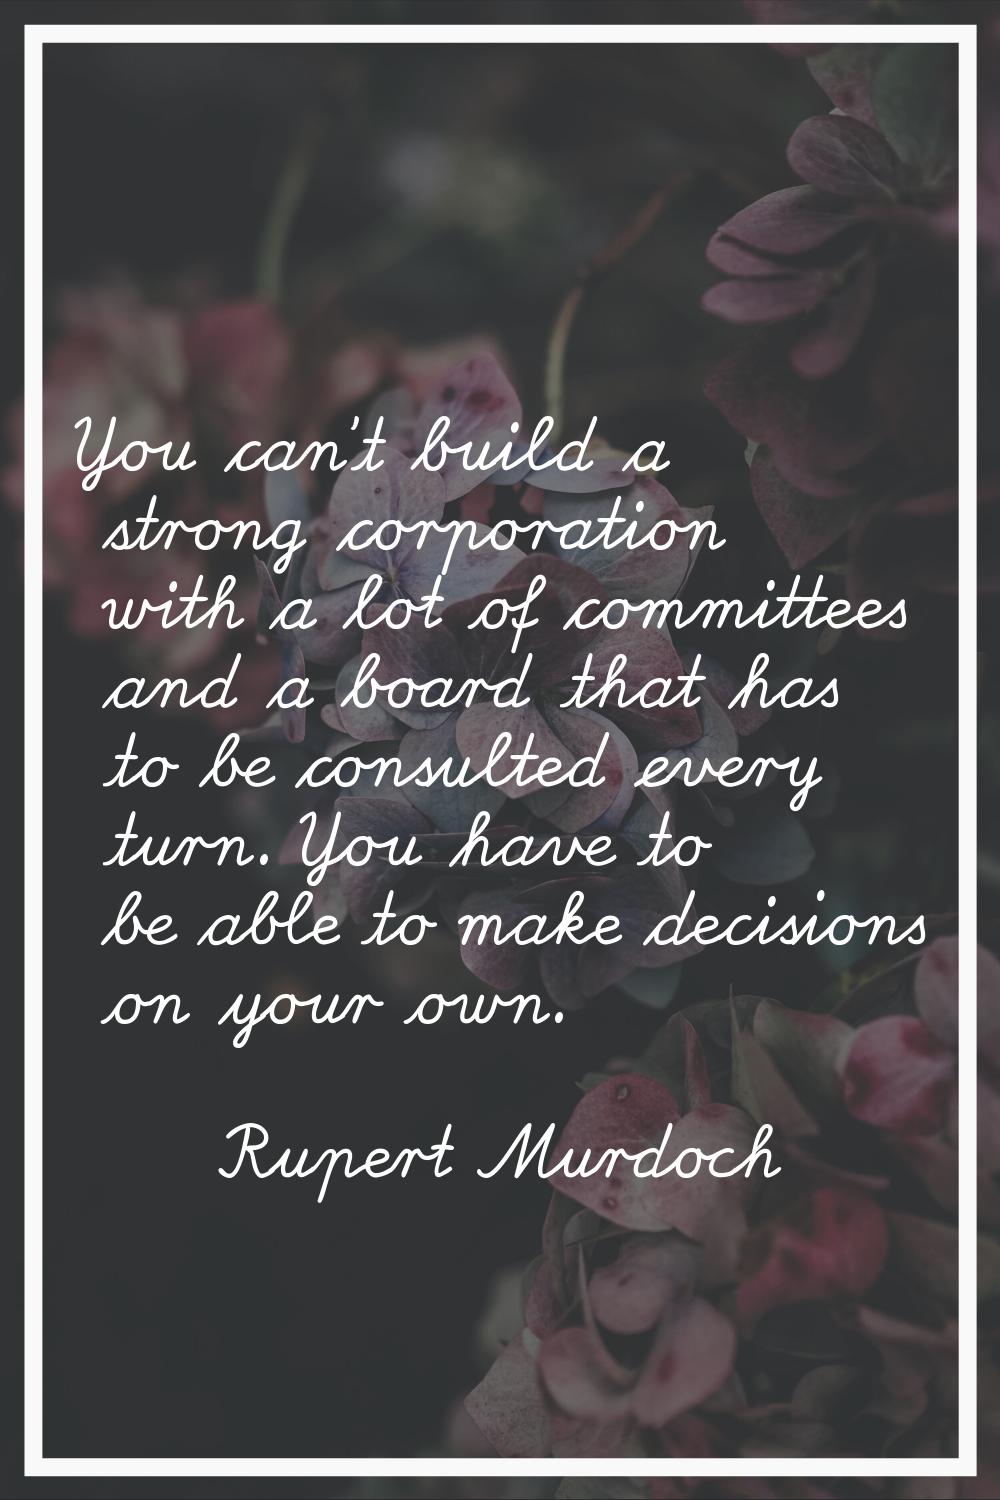 You can't build a strong corporation with a lot of committees and a board that has to be consulted 